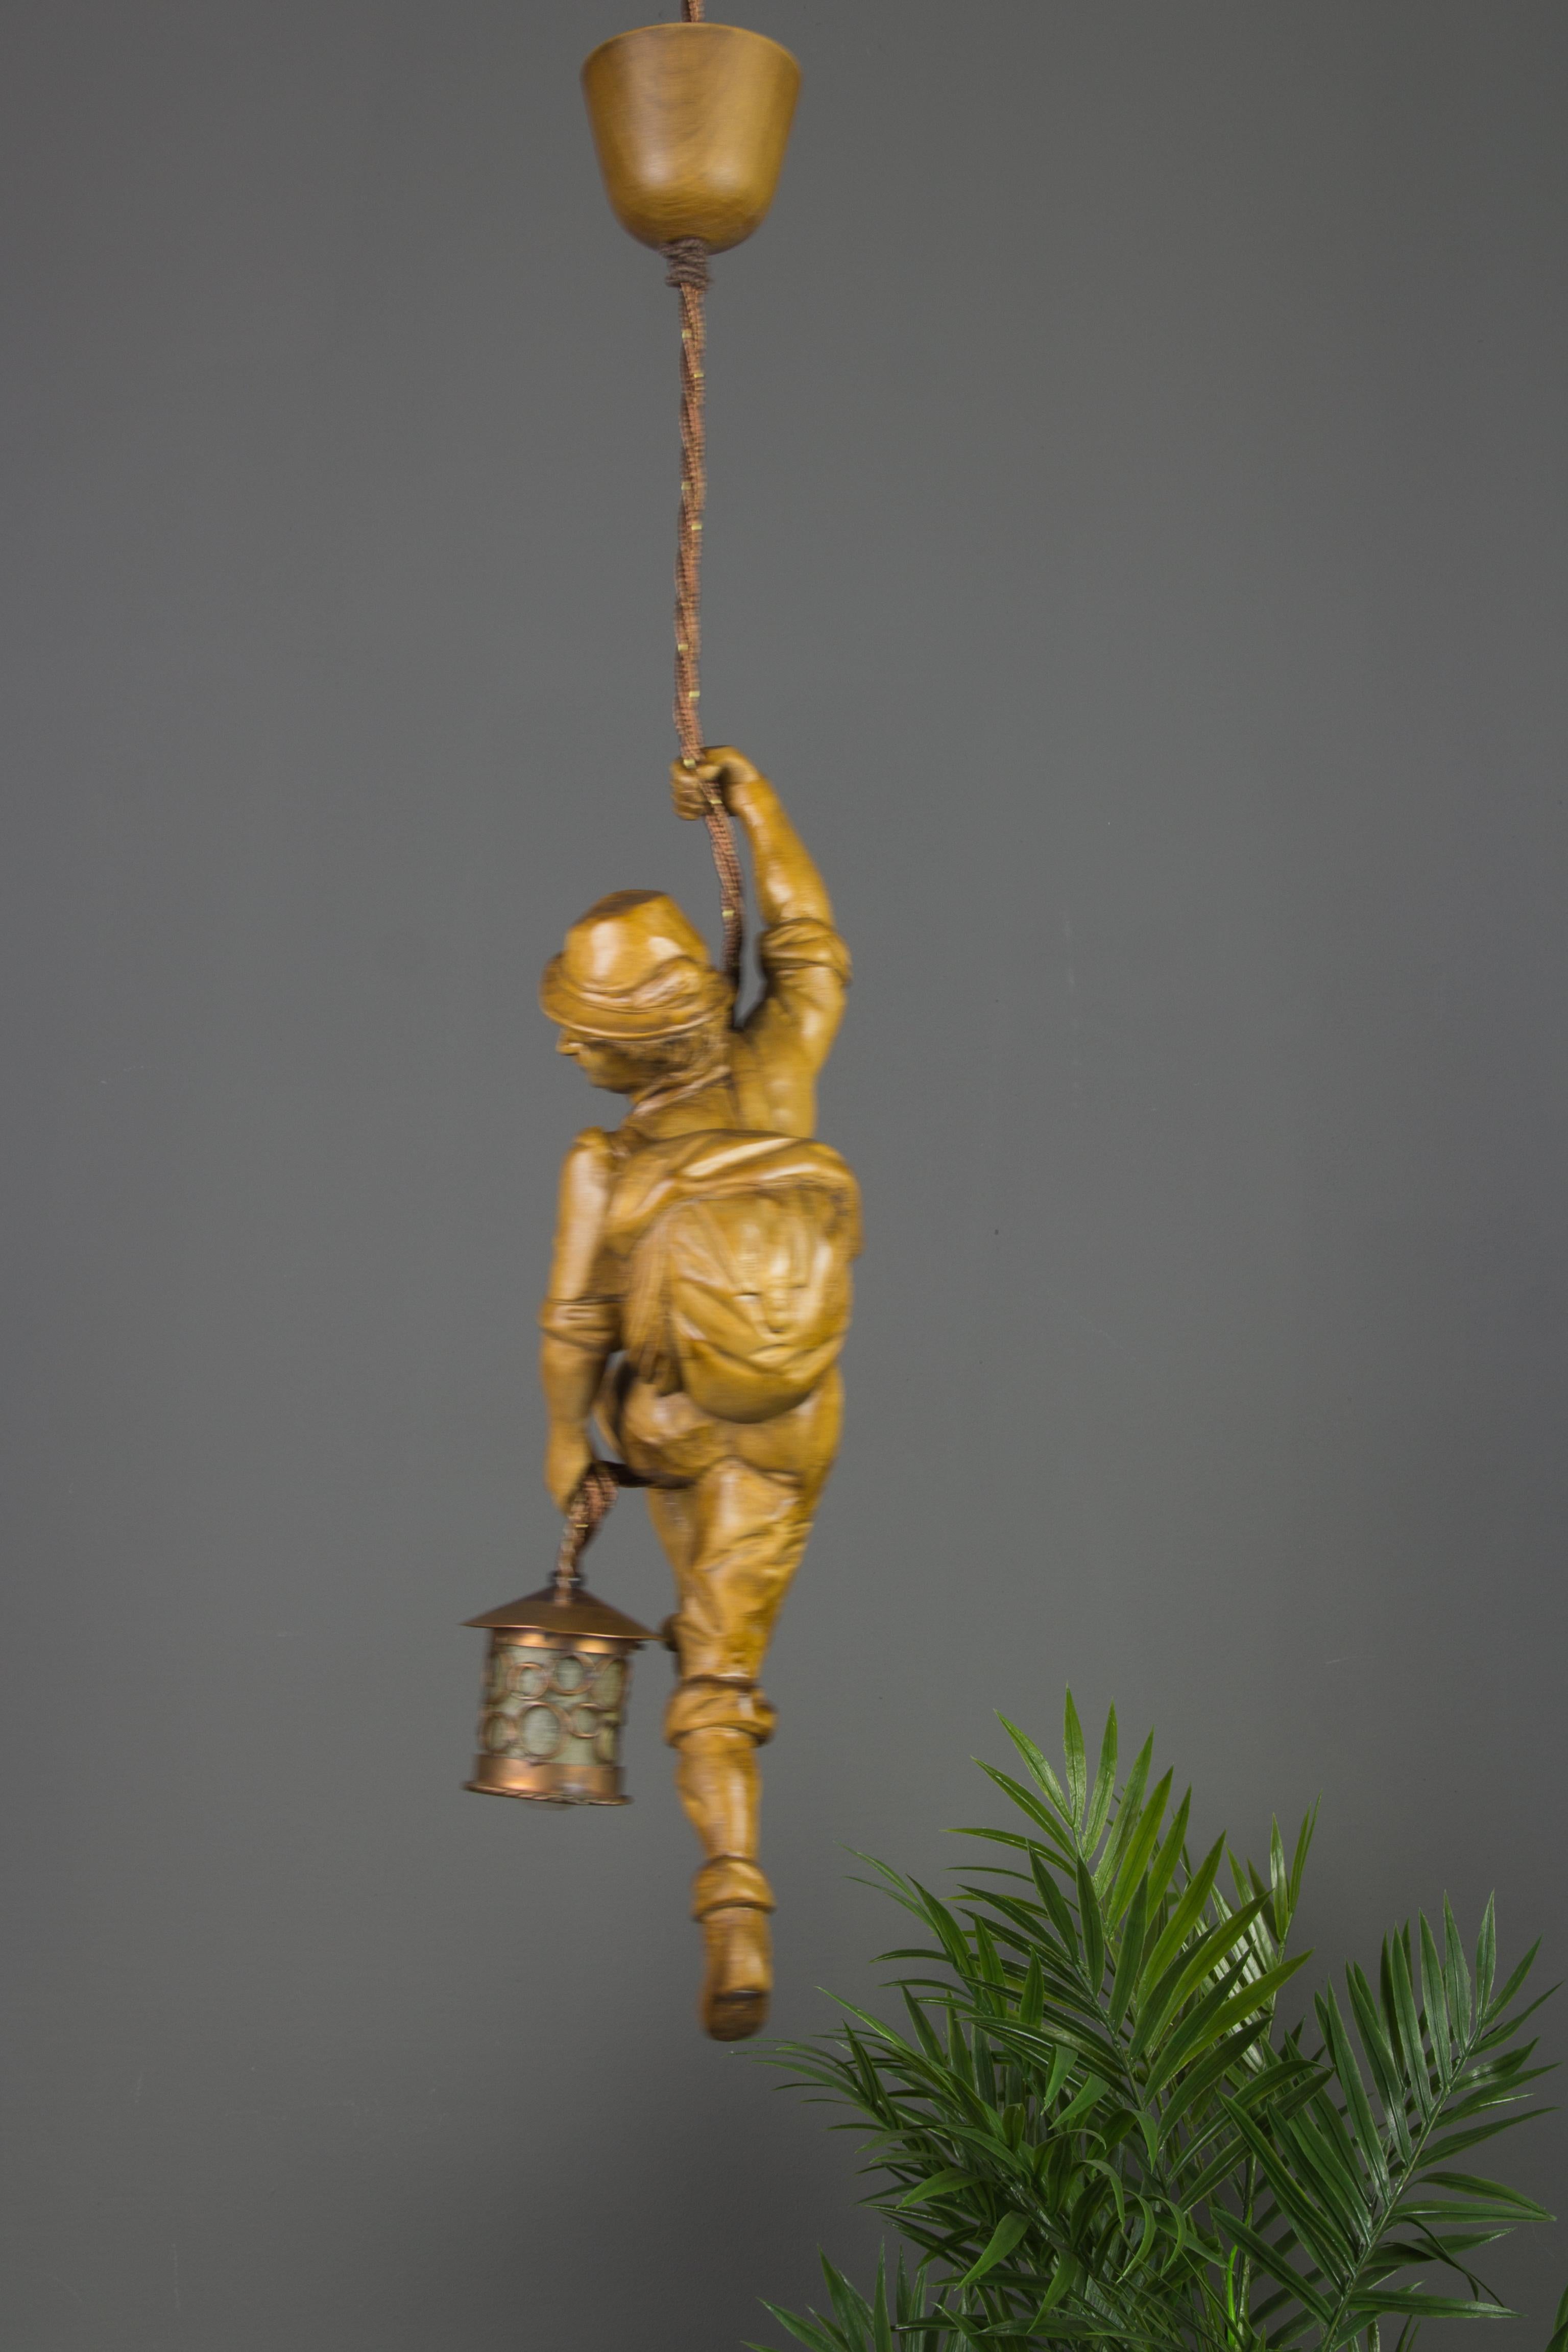 Mid-20th Century German Pendant Light Hand Carved Wood Figure Mountaineer Climber with Lantern